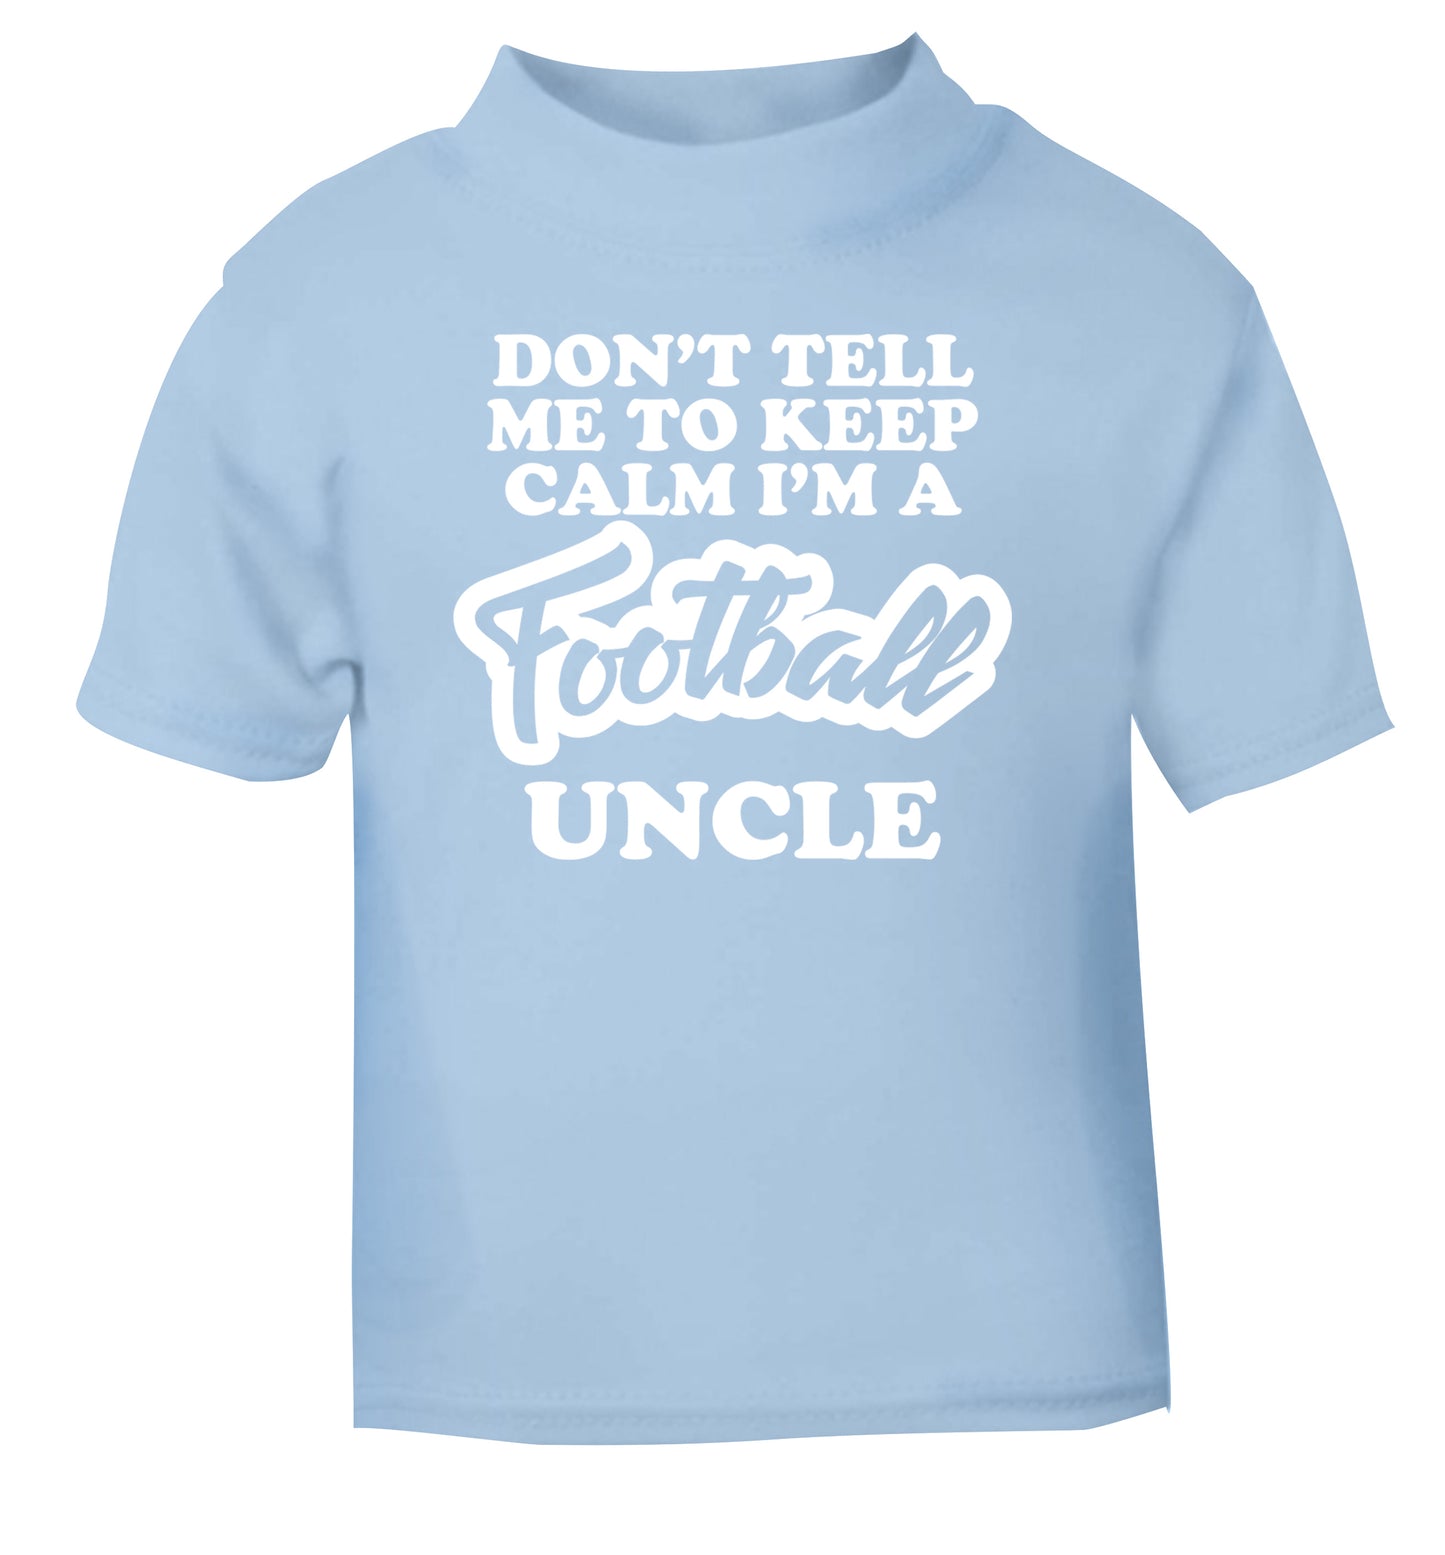 Don't tell me to keep calm I'm a football uncle light blue Baby Toddler Tshirt 2 Years